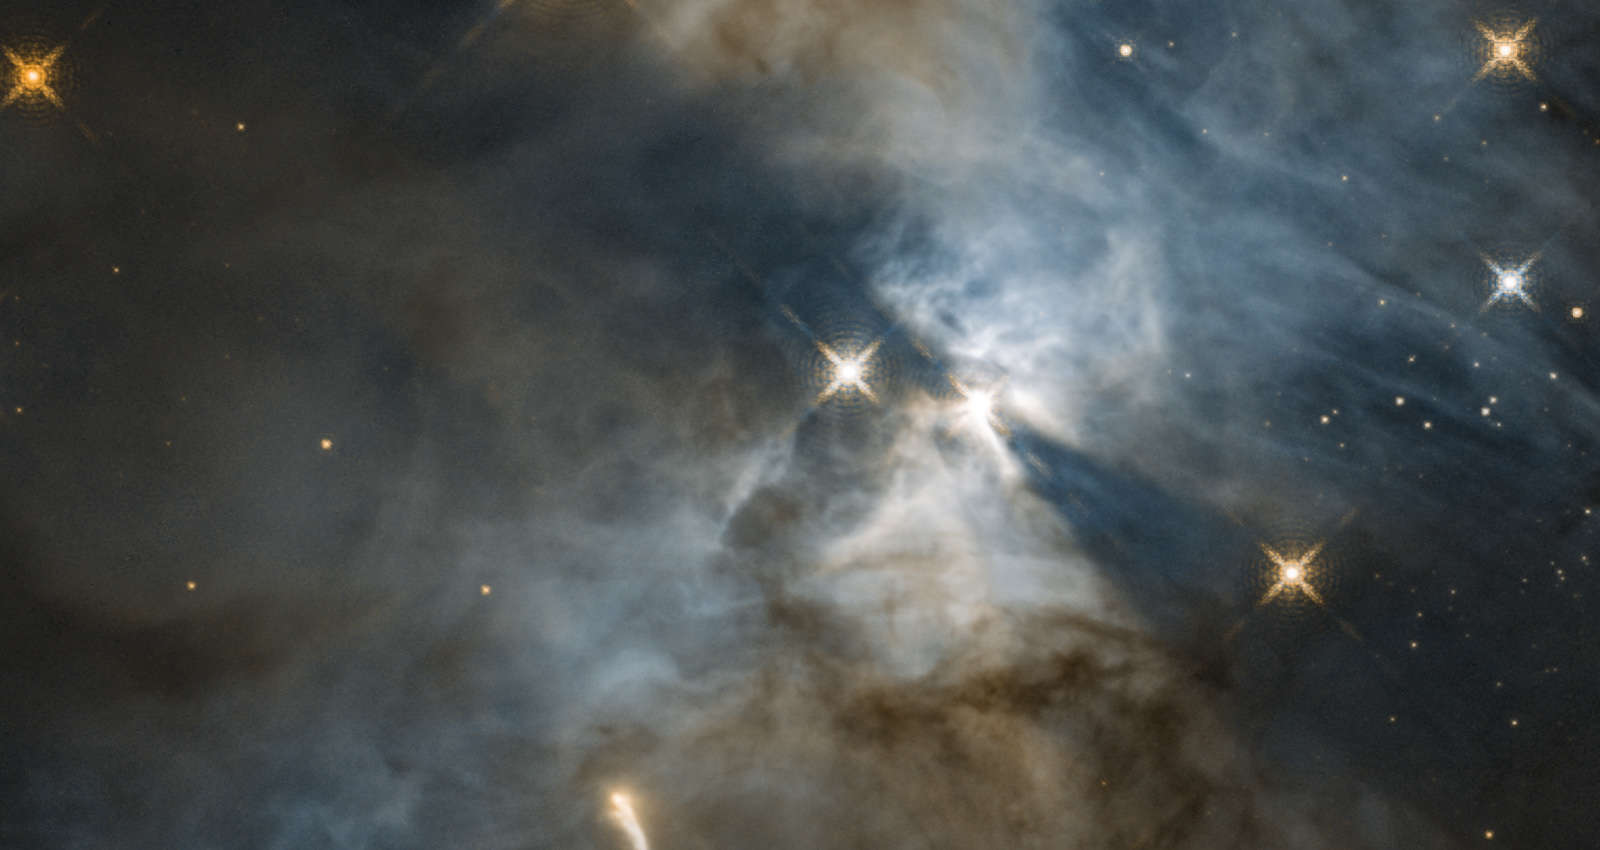 The star EC 82 (right of center) casts two long shadows onto the nebulosity around it in this Hubble image of a young star-forming region. Credit: NASA, ESA, and STScI